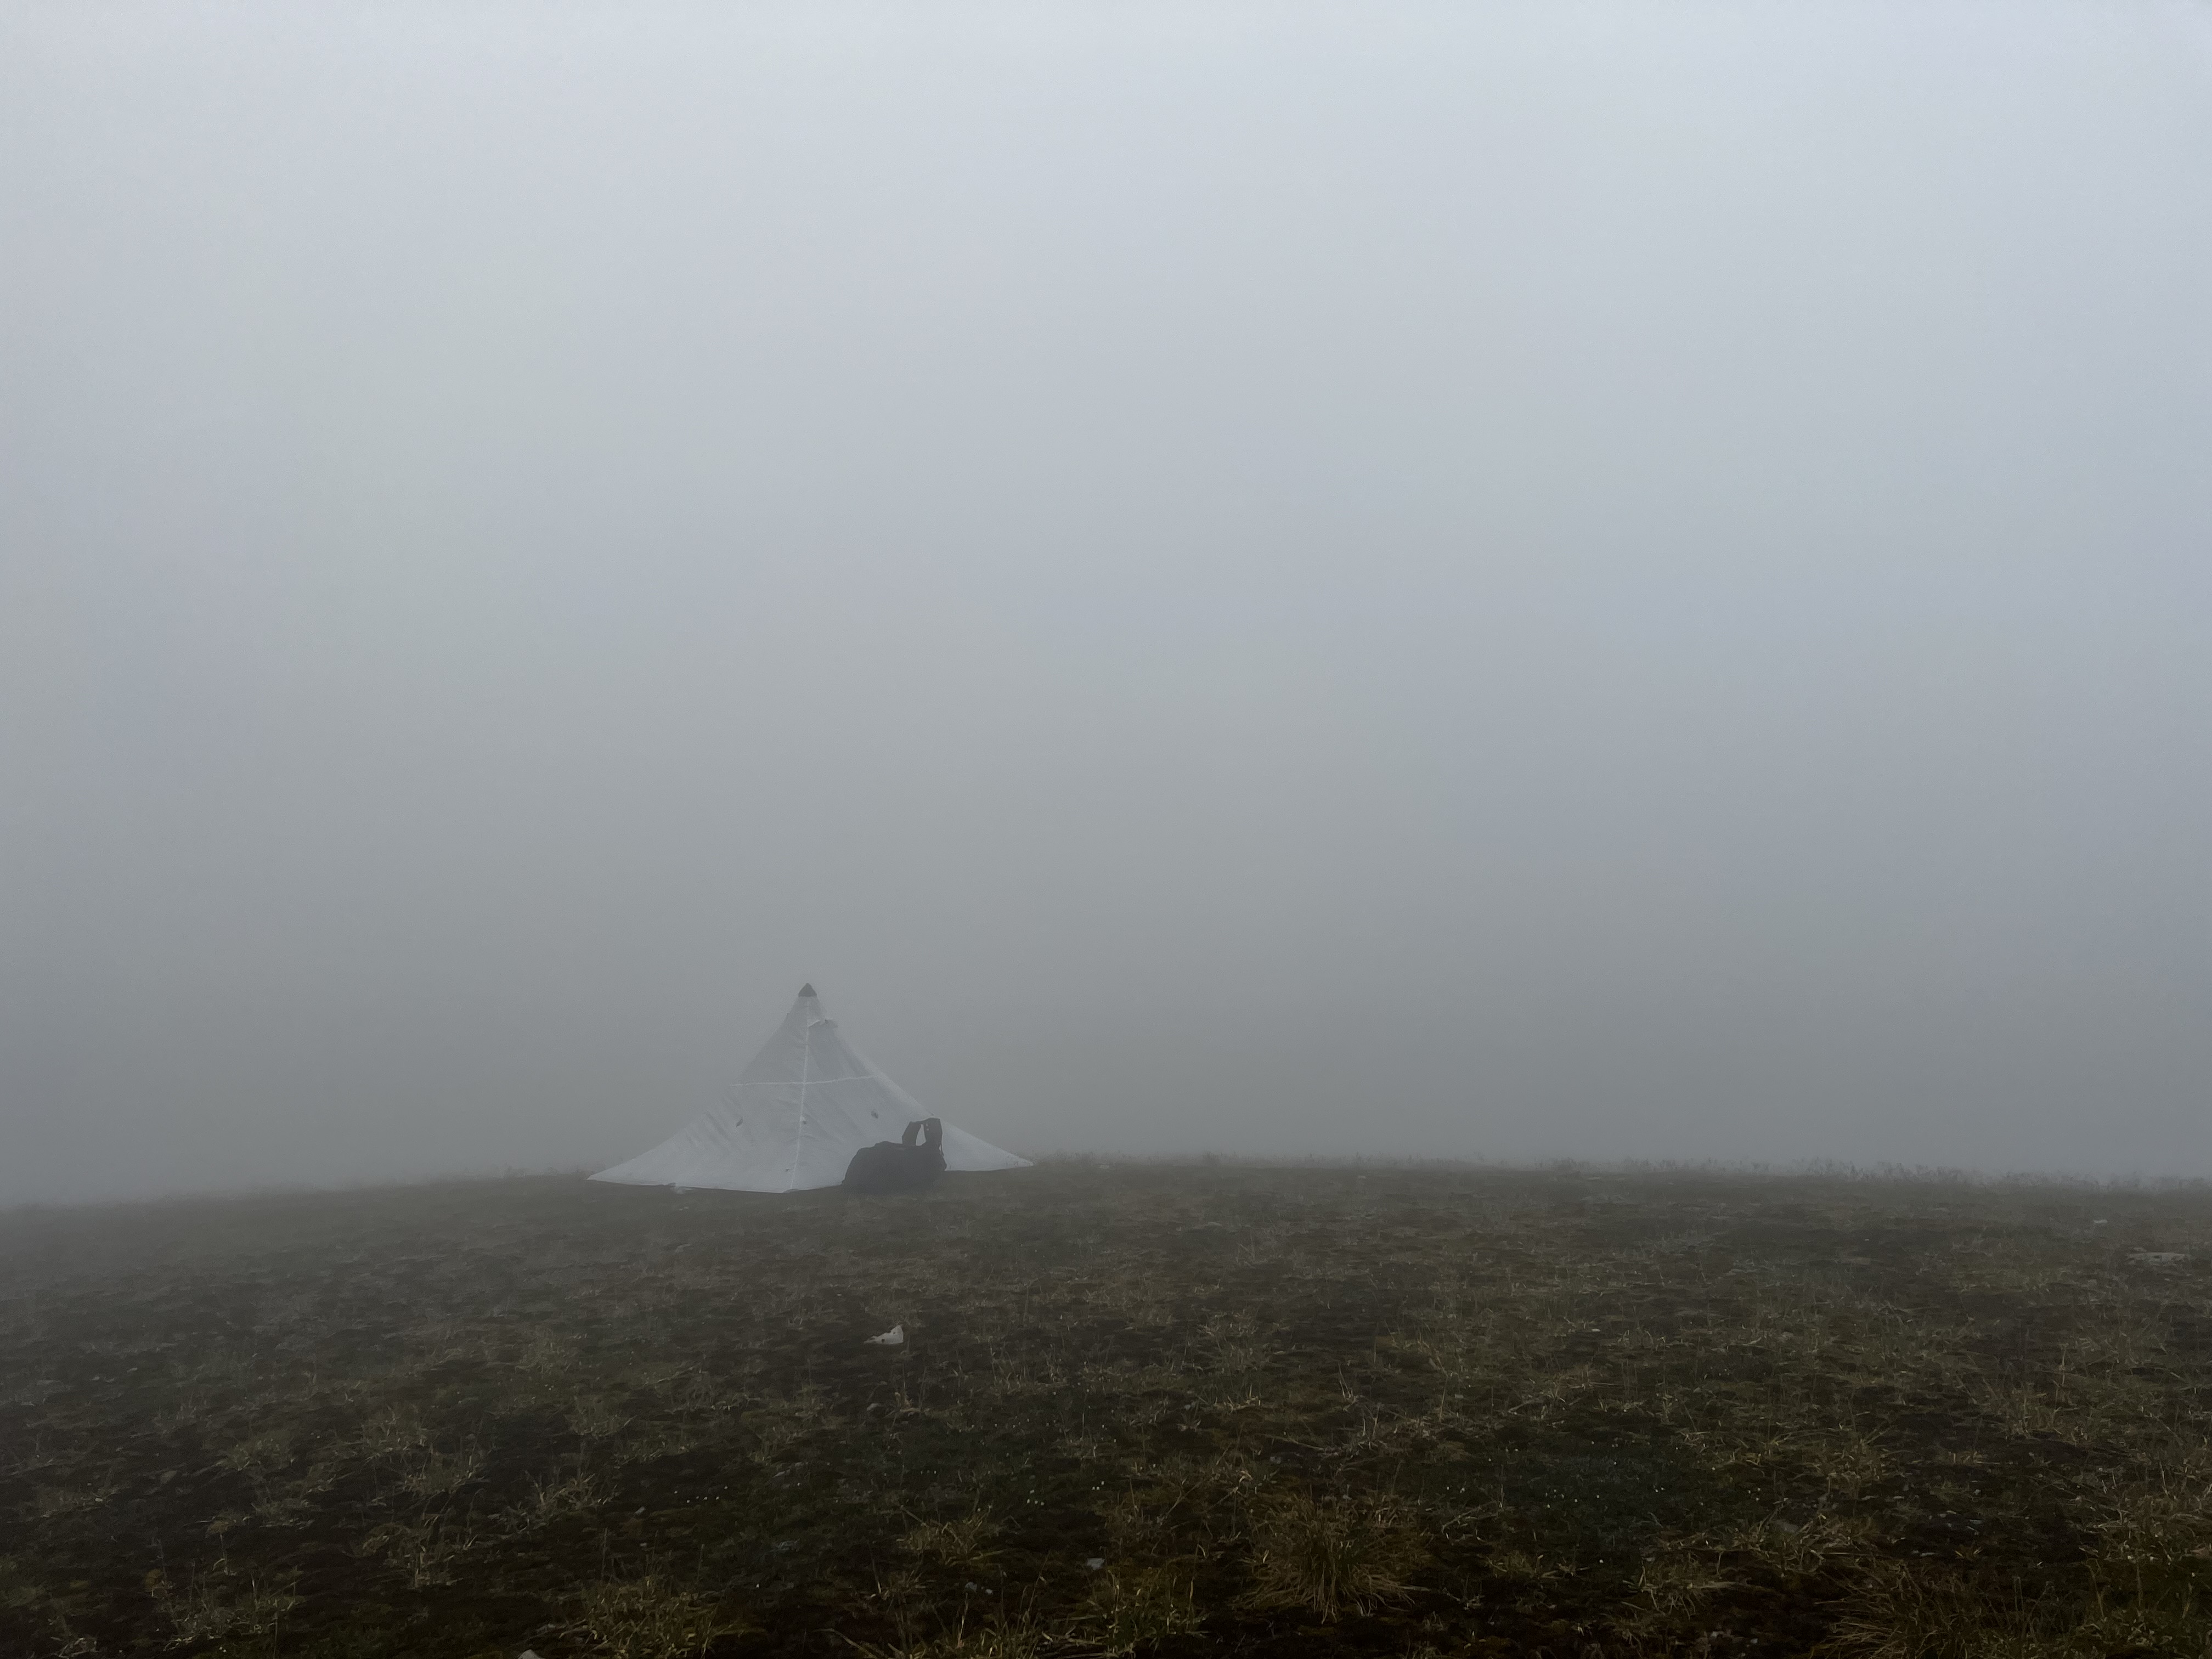 The silhouette of tent pitched on tundra against a backdrop of dense fog